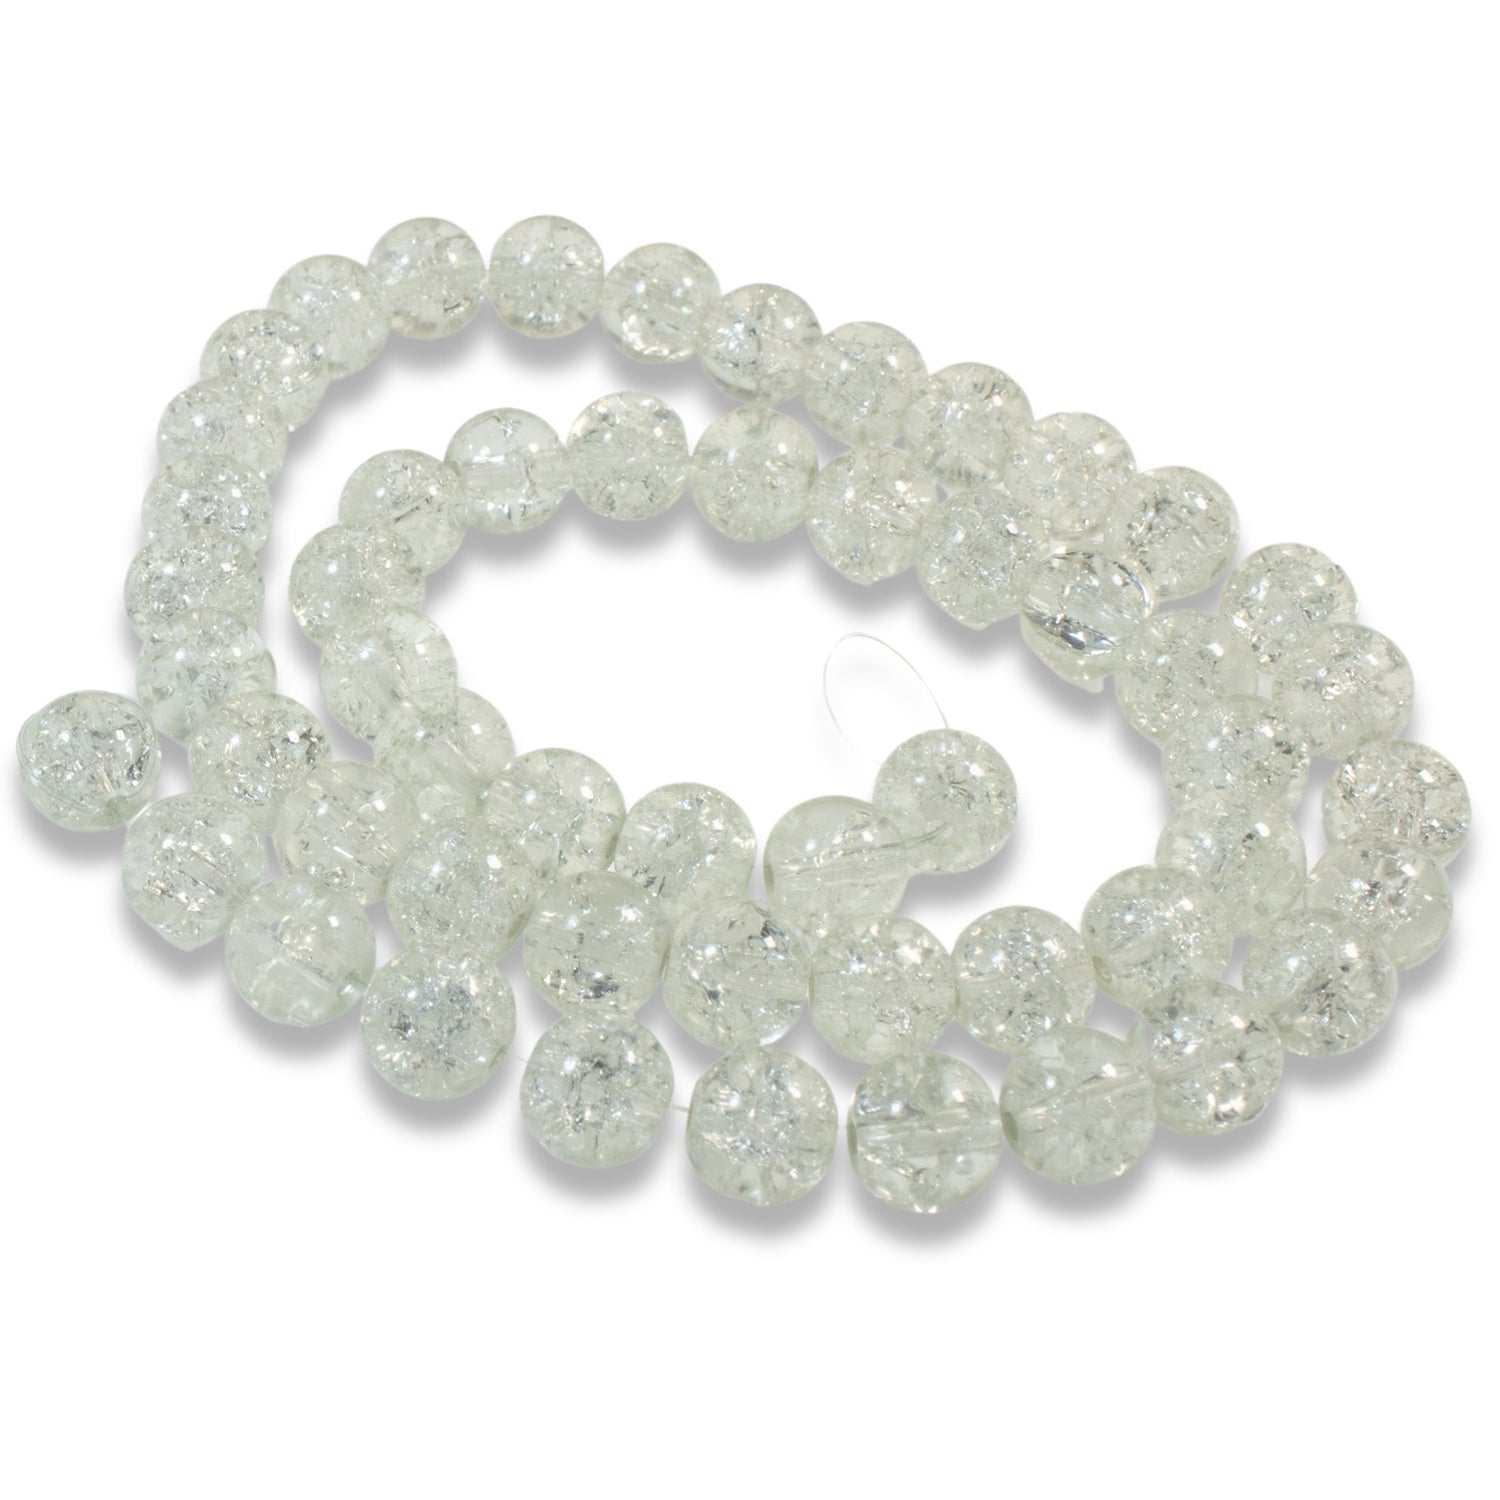 8mm Clear Round Glass Crackle Beads | Hackberry Creek